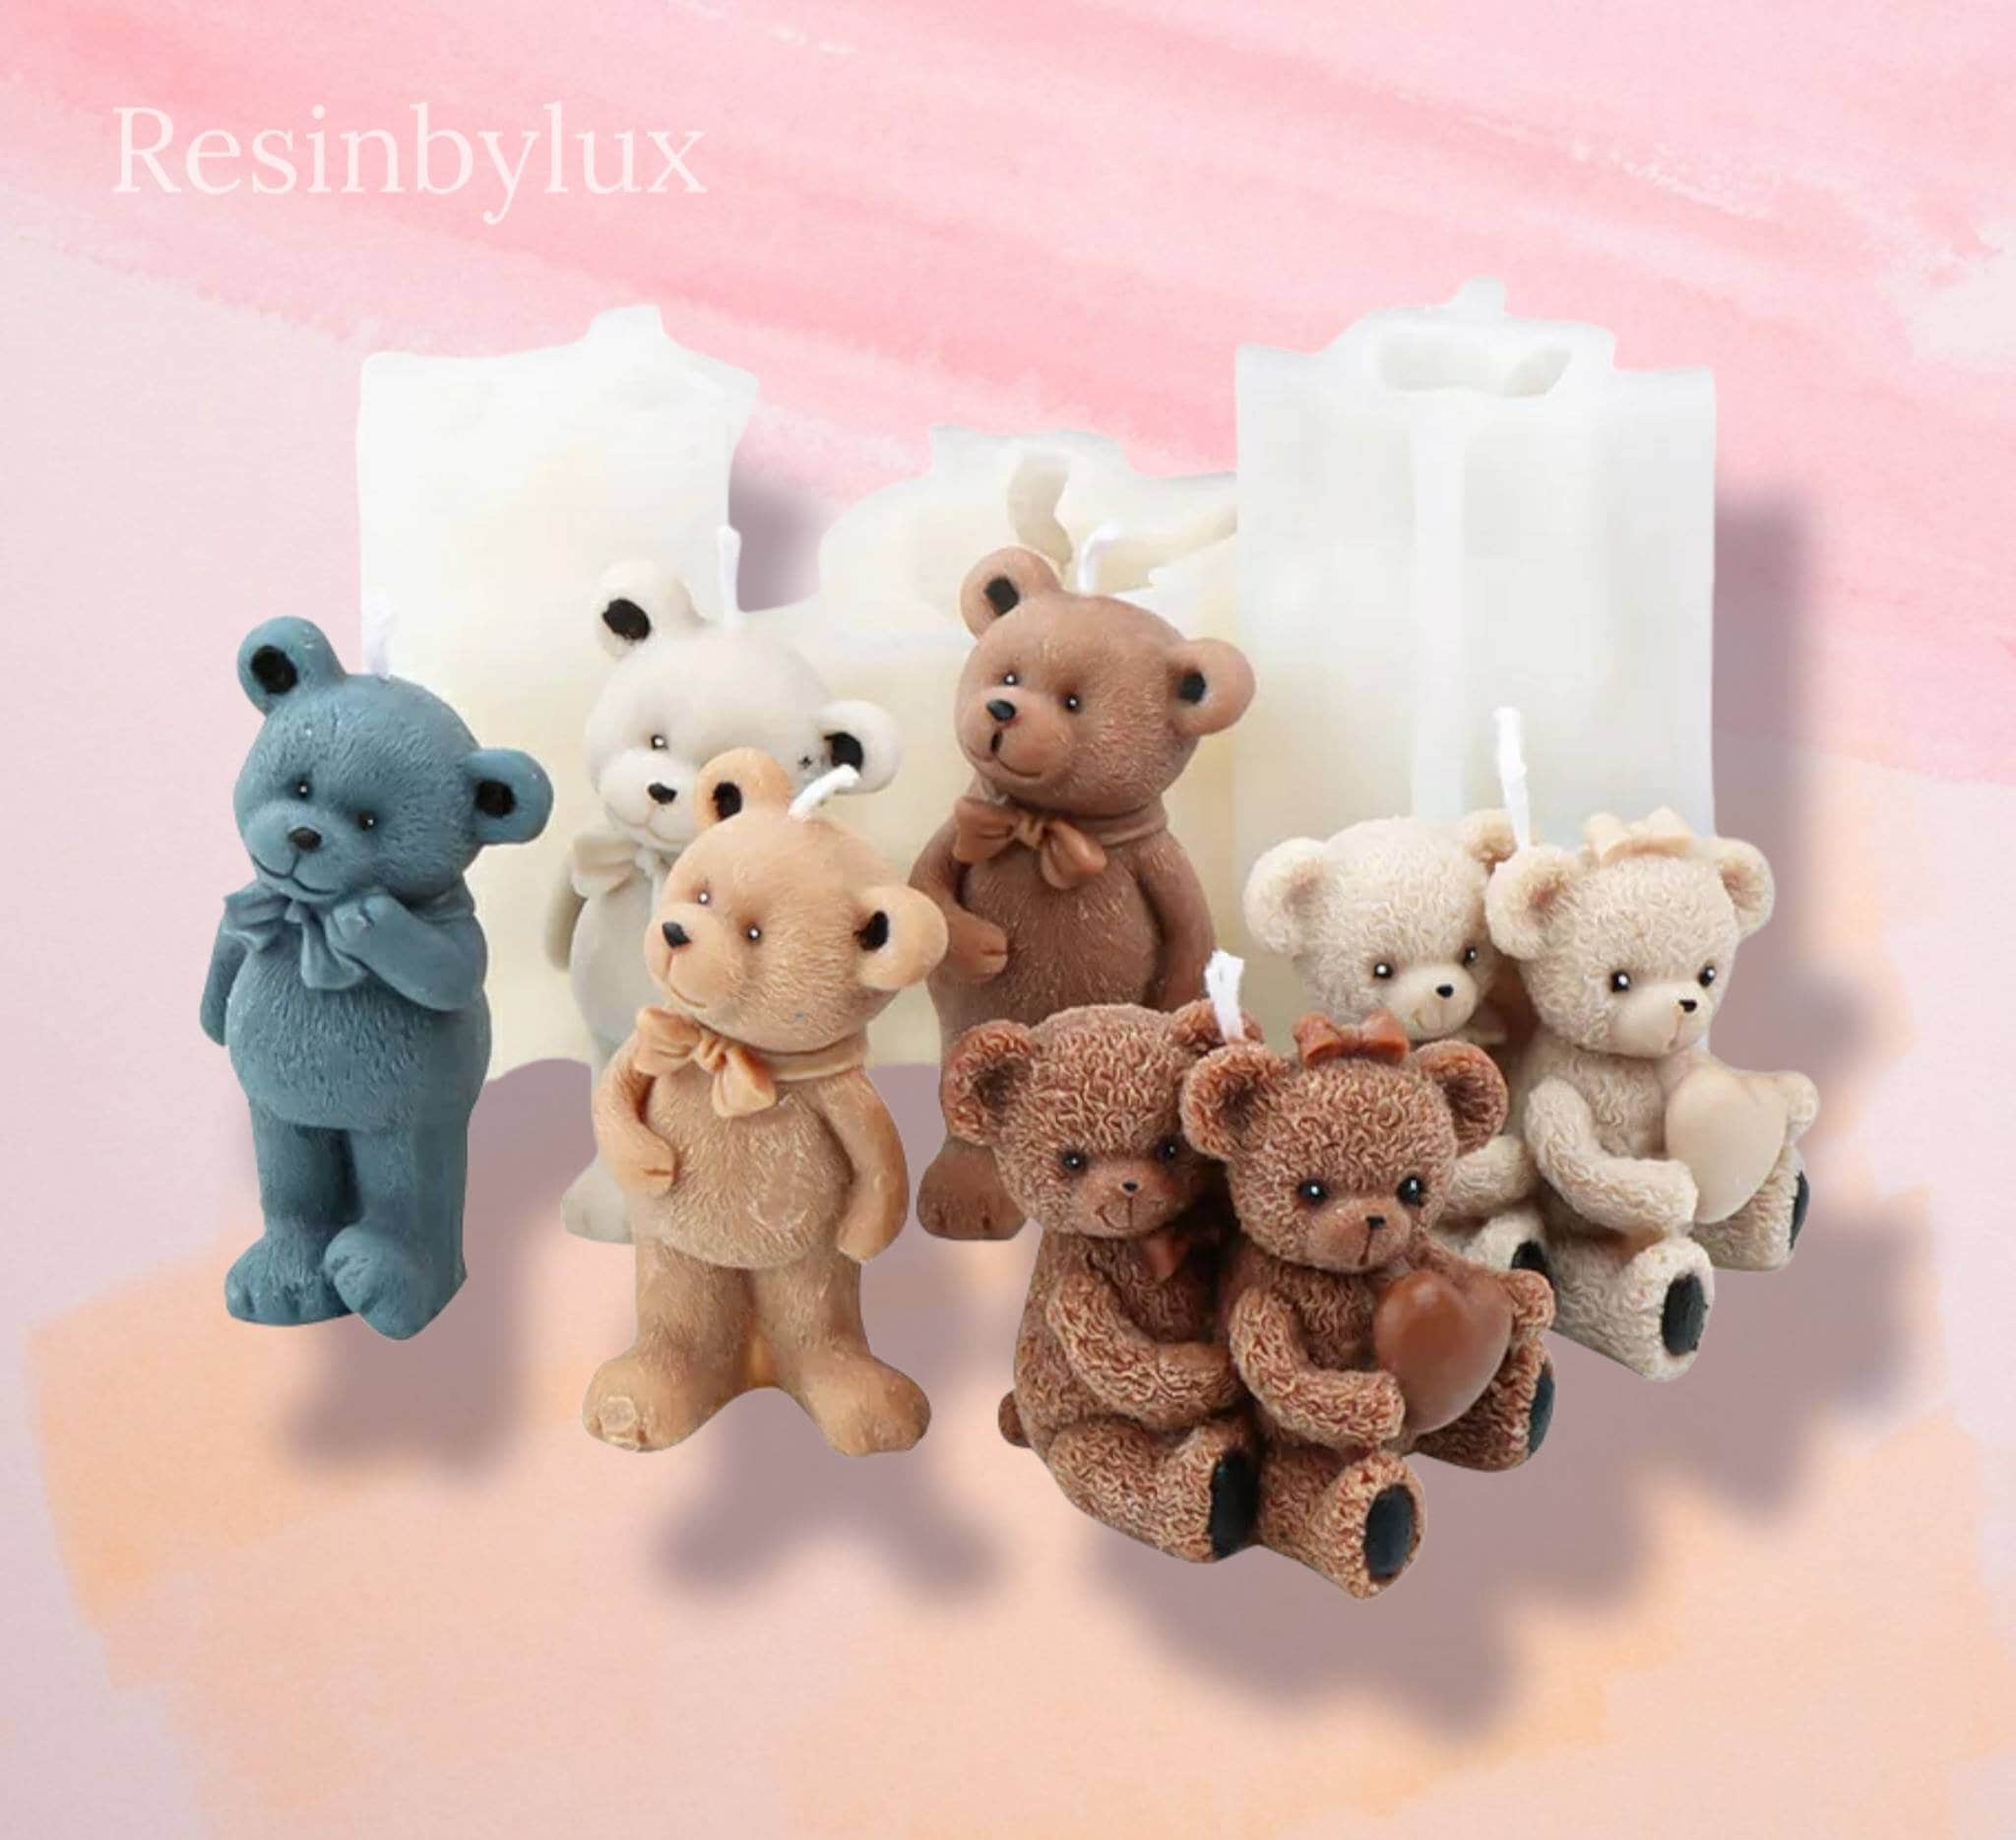 LIANXUE Durable Silicone Mold for Cute Bear Shaped Scented Candle Mold for  Birthday Party Reusable Resin Soap Candle Making Mold